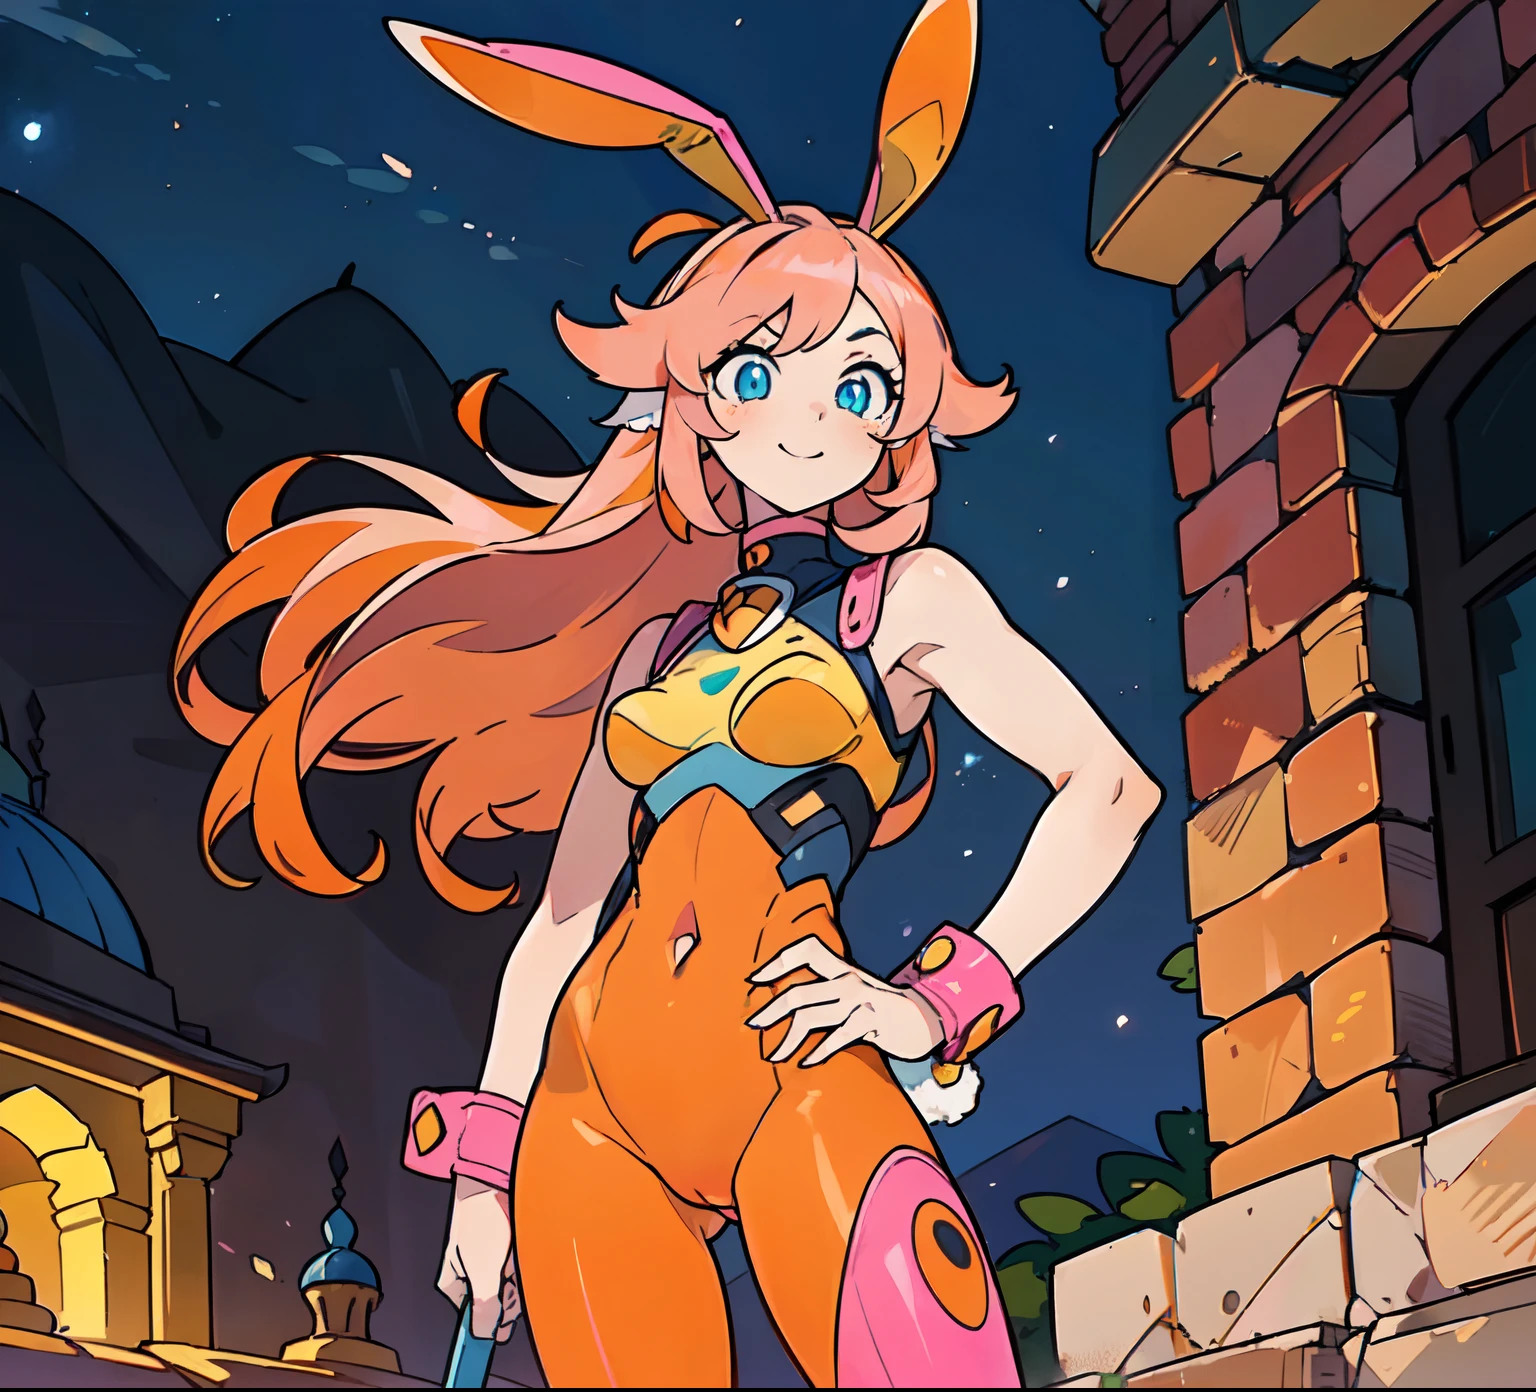 ((Best Quality)), ((Masterpiece)), ((Realistic)) 1woman, cute face, determined look, smile, adult mature female (spiky orange-pink hair, ((orange-pink mullet 1.1)), (mid length hair), blue eyes, (white/yellow pupil,) hero, sleeveless blue spandex bodysuit, long orange-pink (((rabbit ears,))) desert village, tbcc illustration, standing in a villa doorway, night, middle eastern,